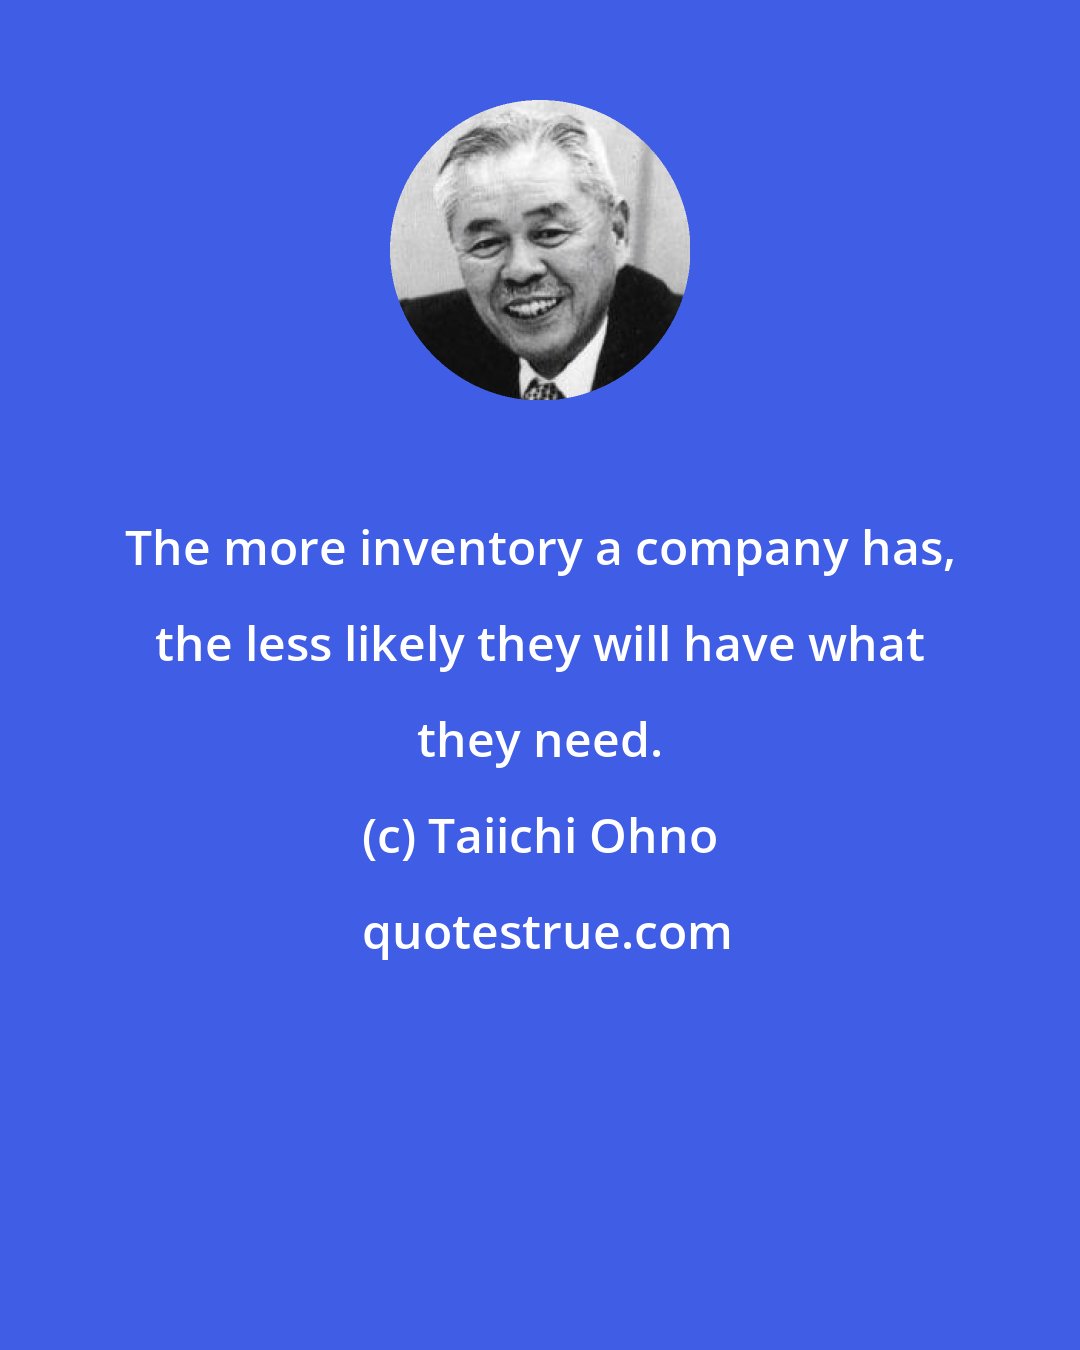 Taiichi Ohno: The more inventory a company has, the less likely they will have what they need.